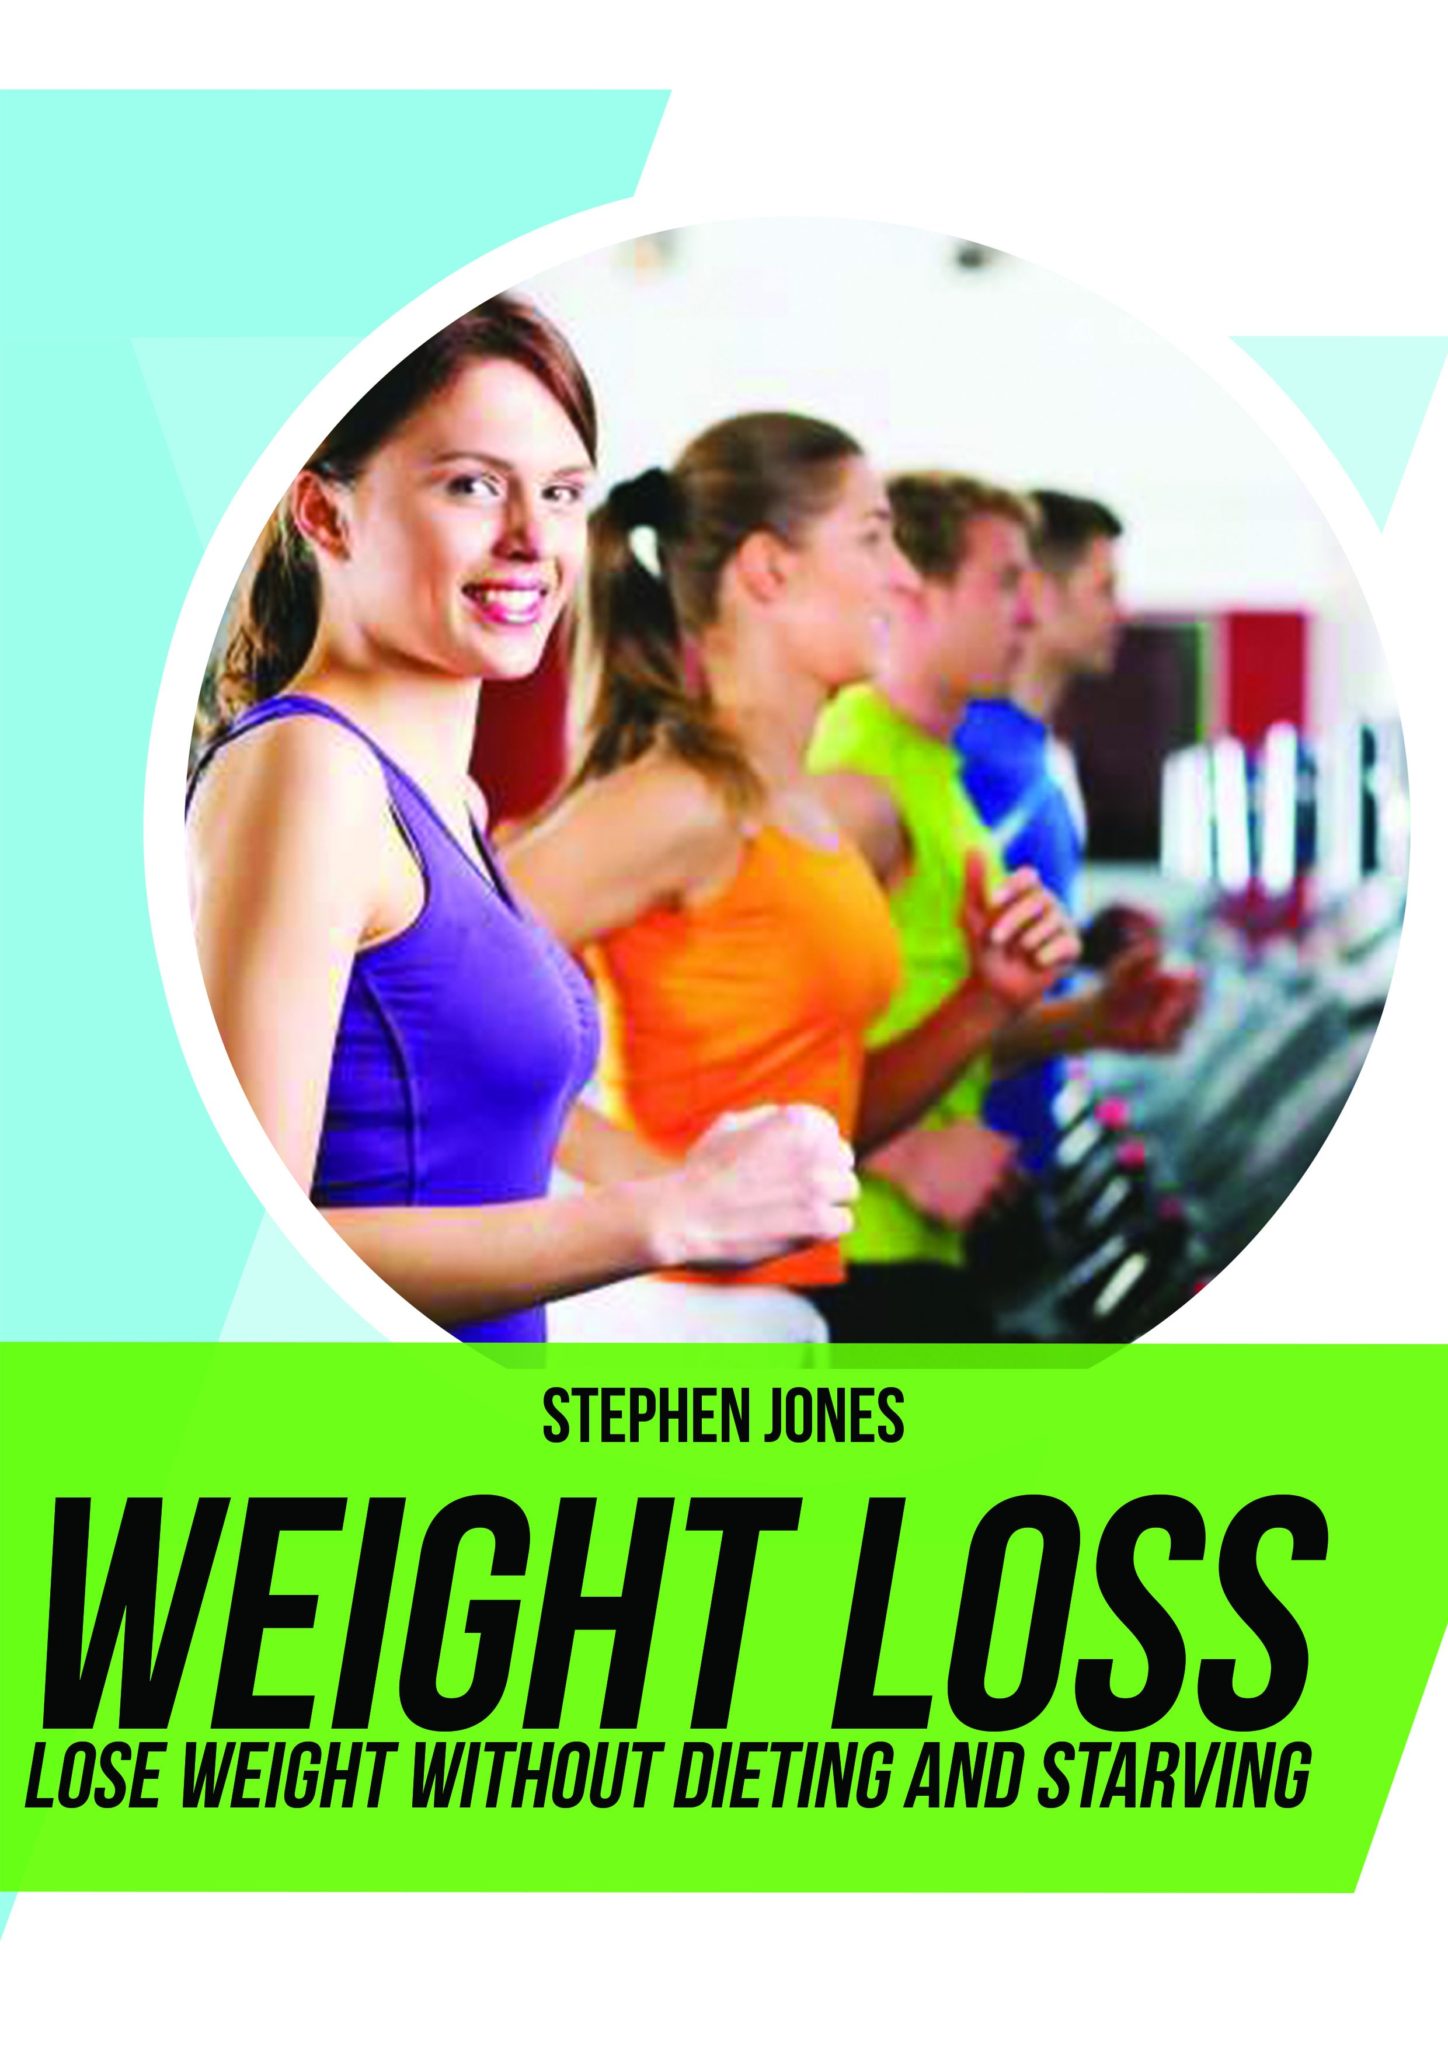 FREE: Weight loss: Lose Weight Without Dieting and Starving by Stephen Jones